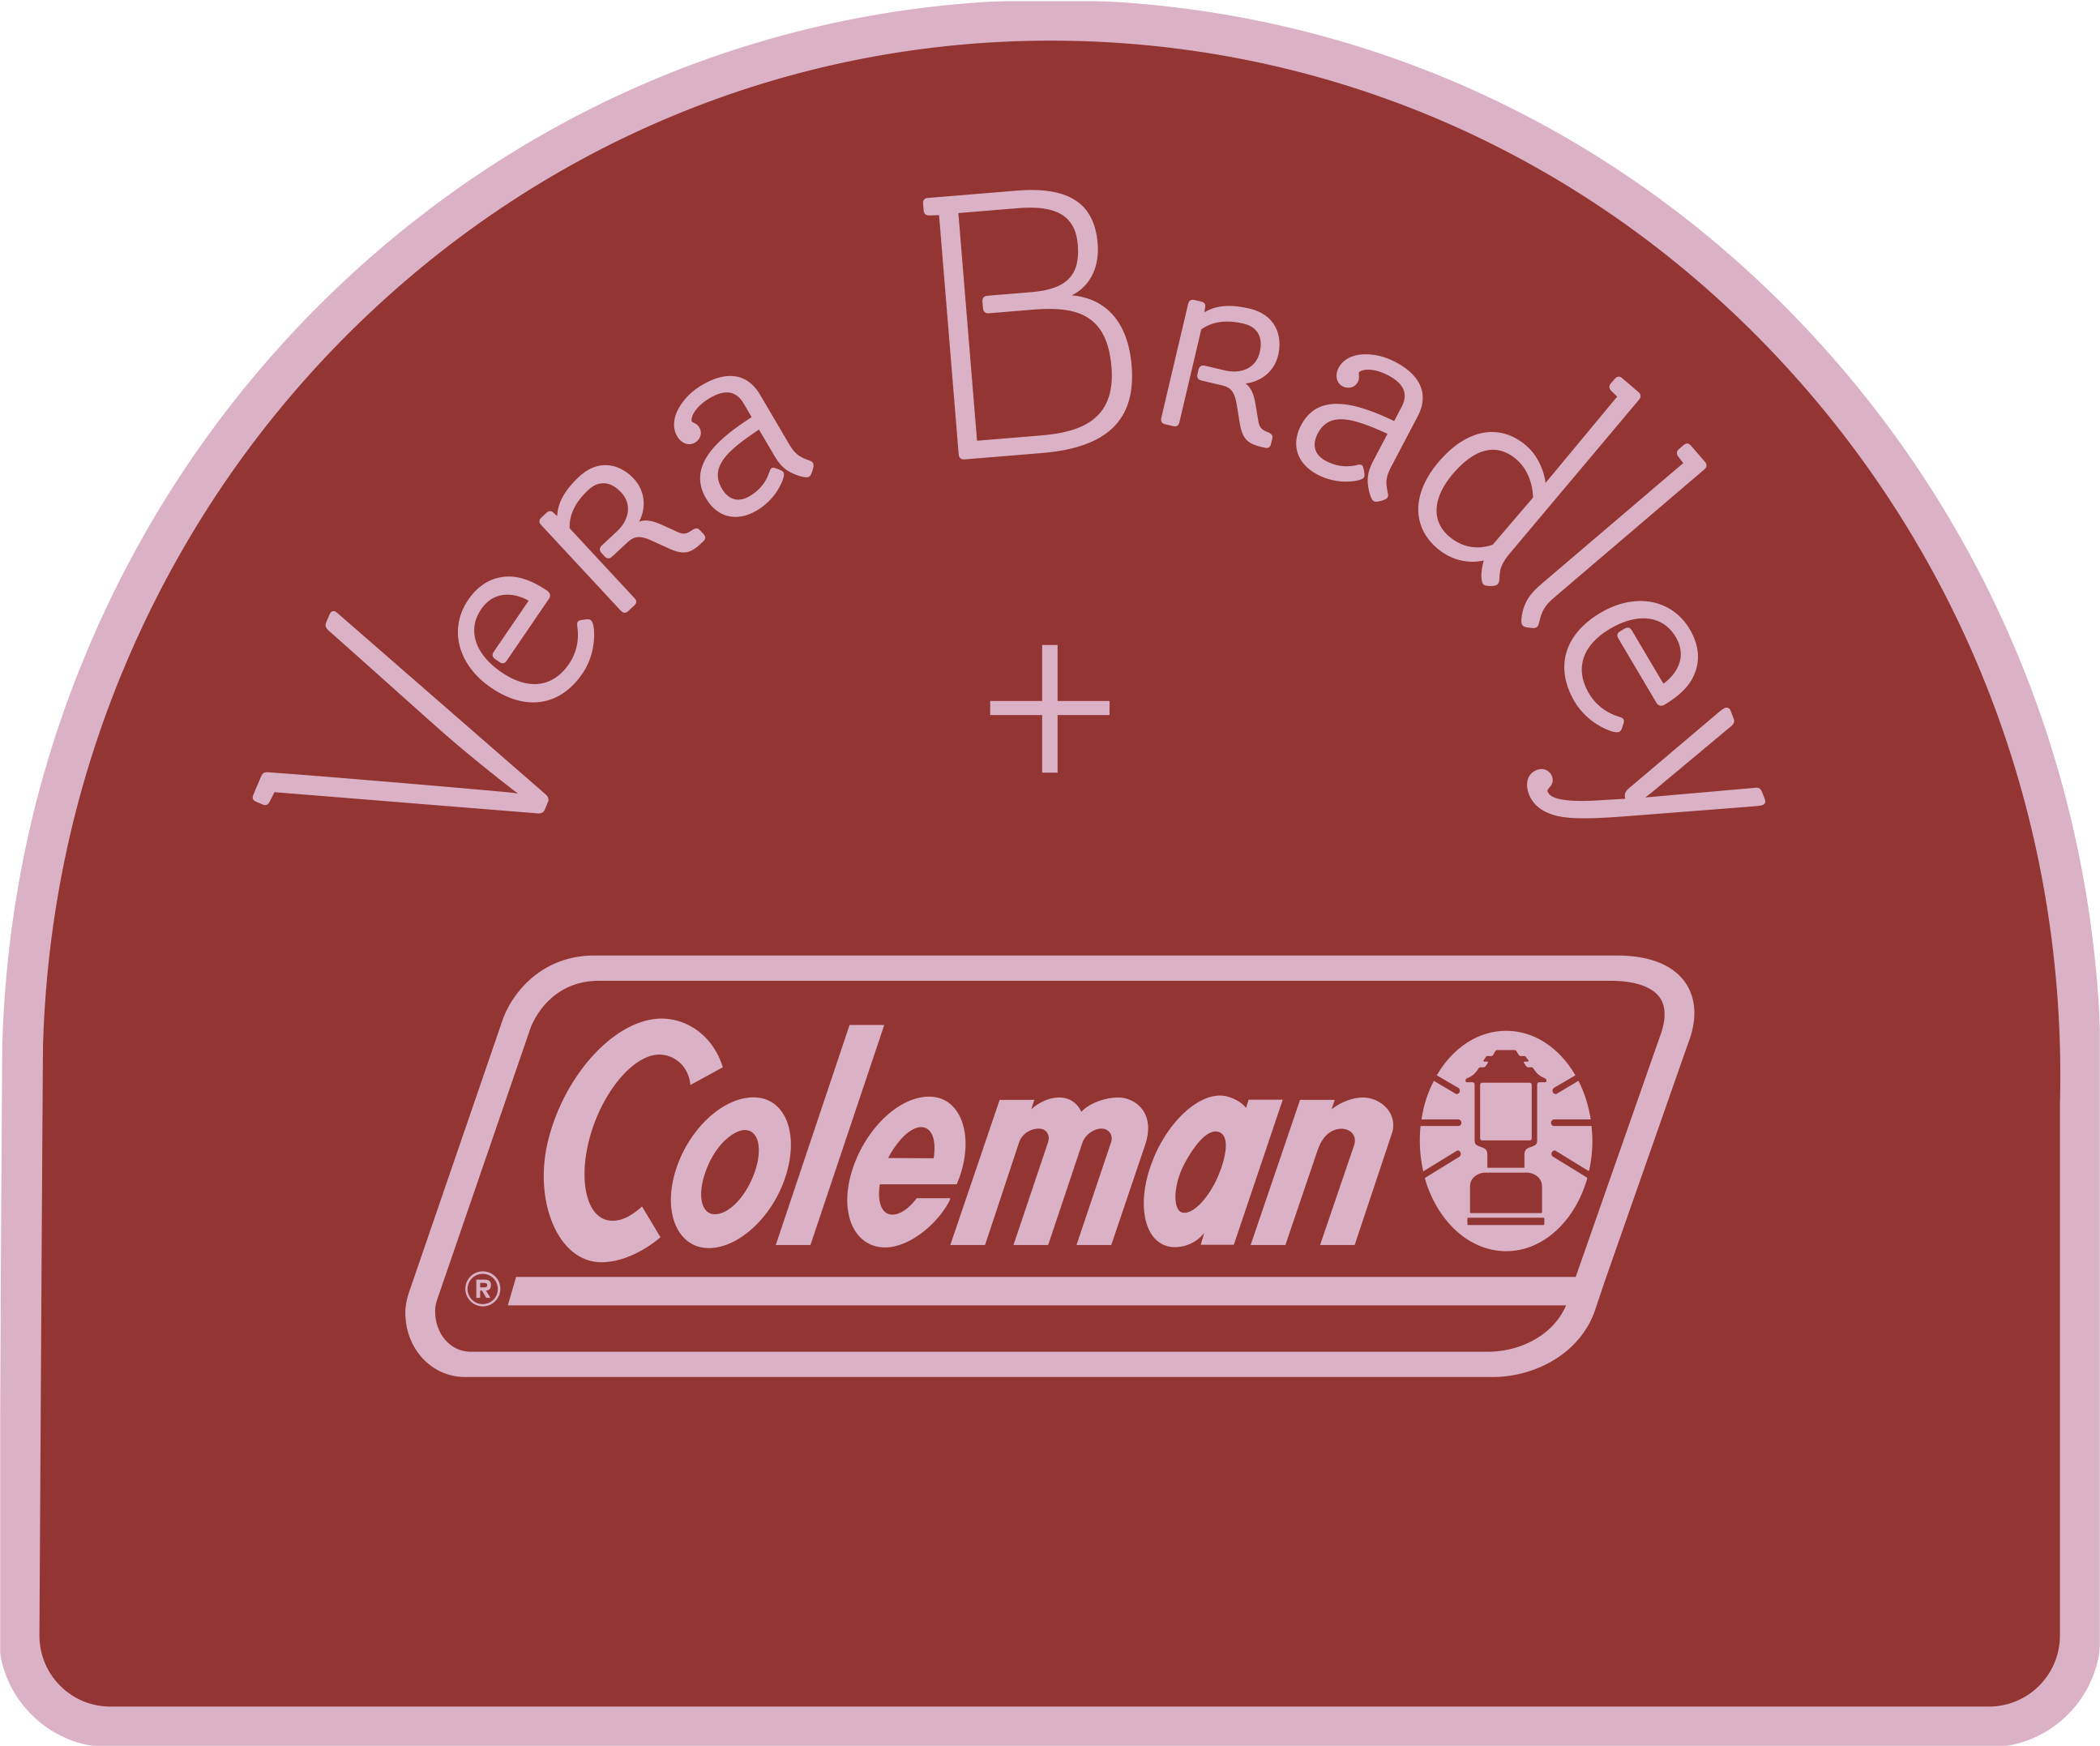 Get Outside With the Vera Bradley + Coleman Collection